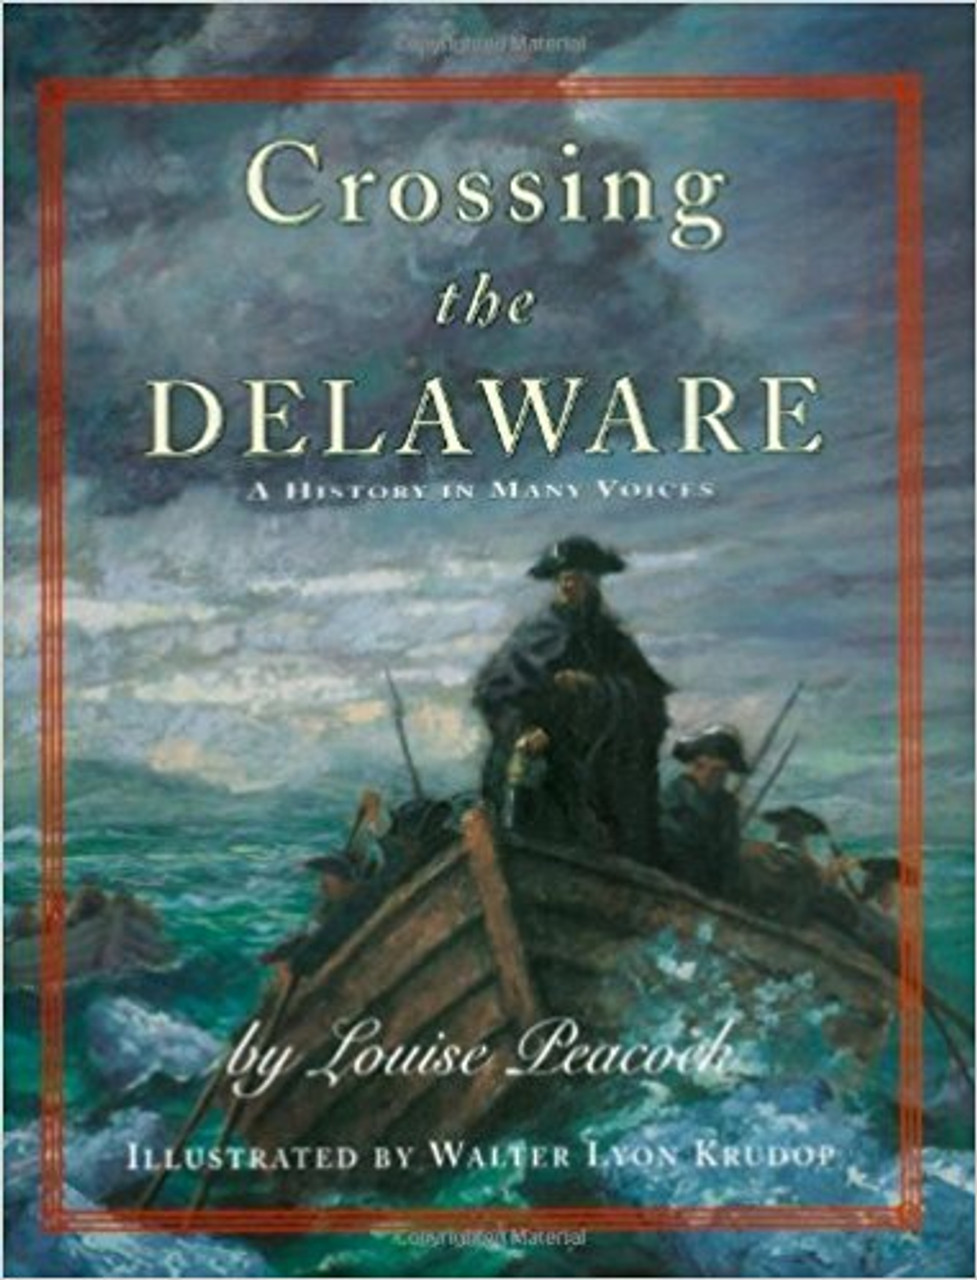 Crossing the Delaware: A History in Many Voices by Louise Peacock